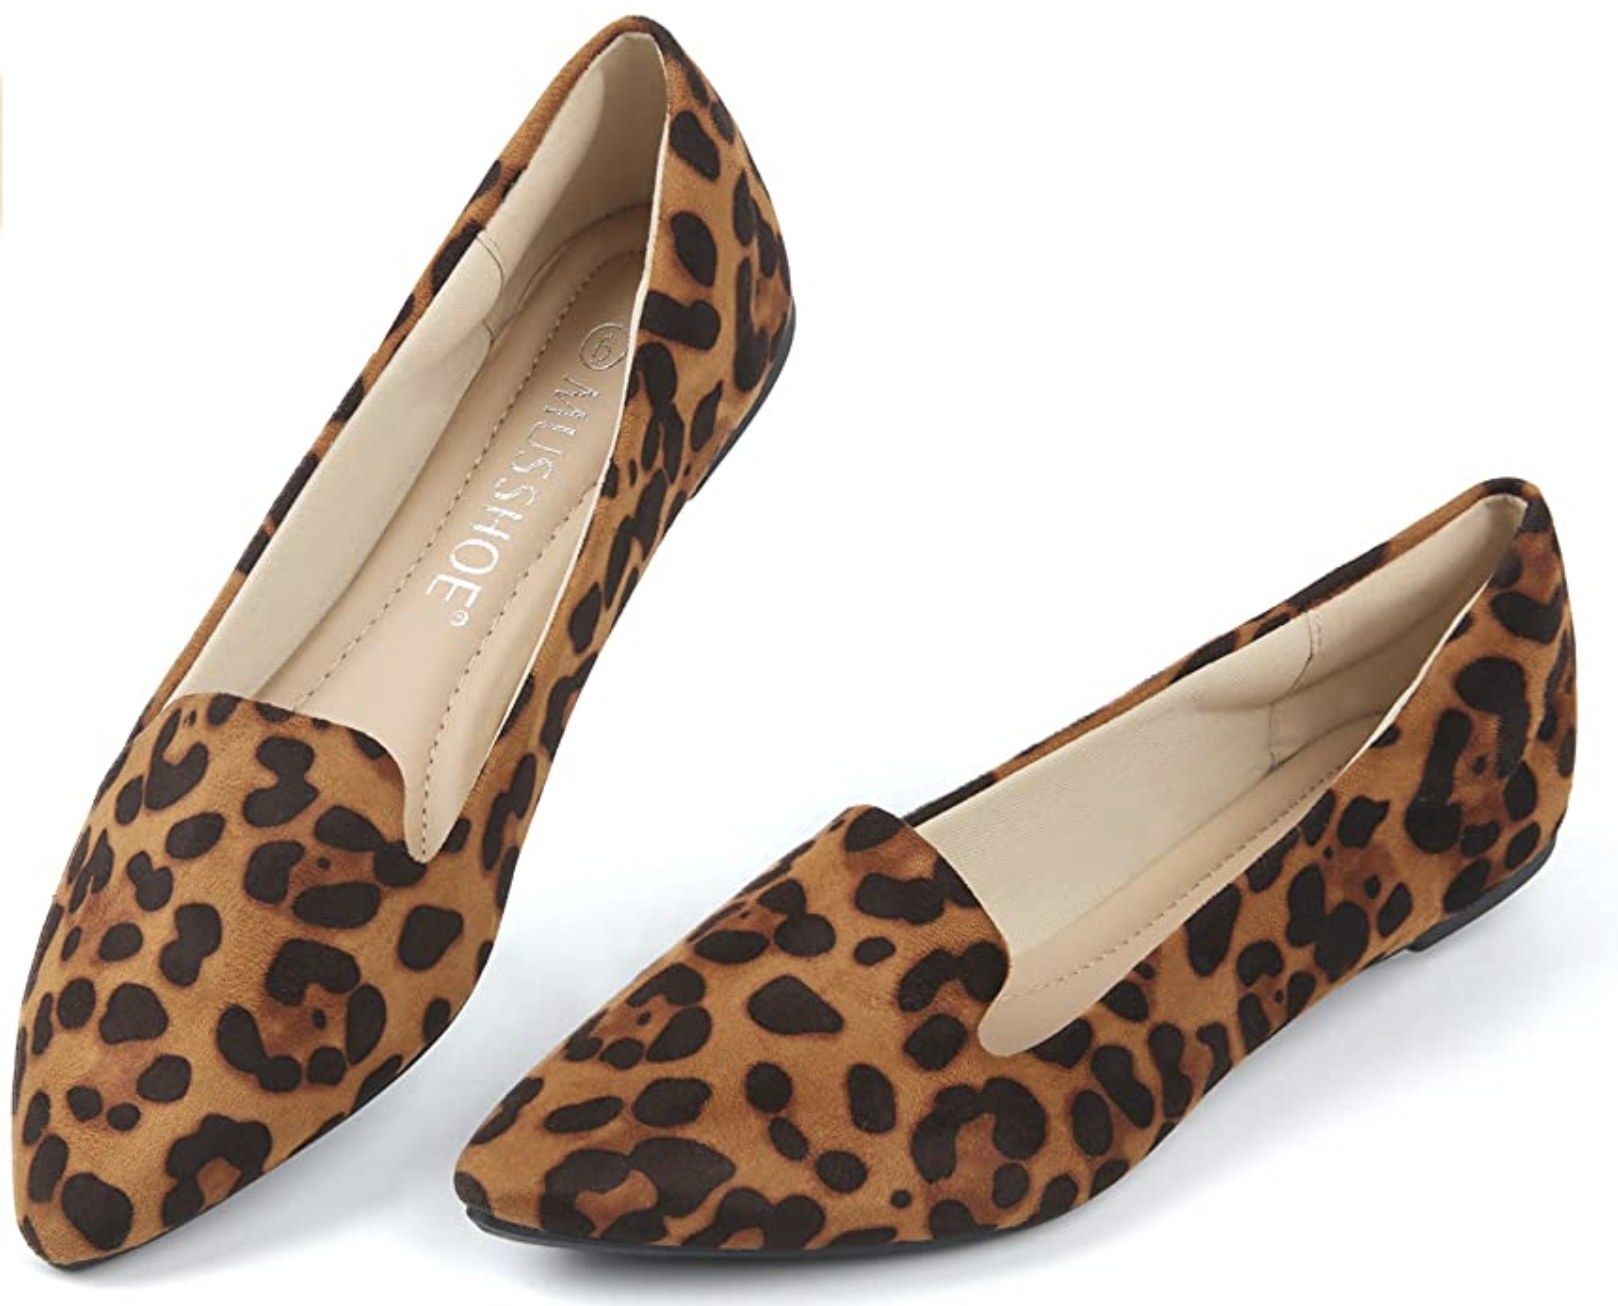 20 Pairs Of Flats From Amazon So Comfortable You May Be Tempted To Cry ...